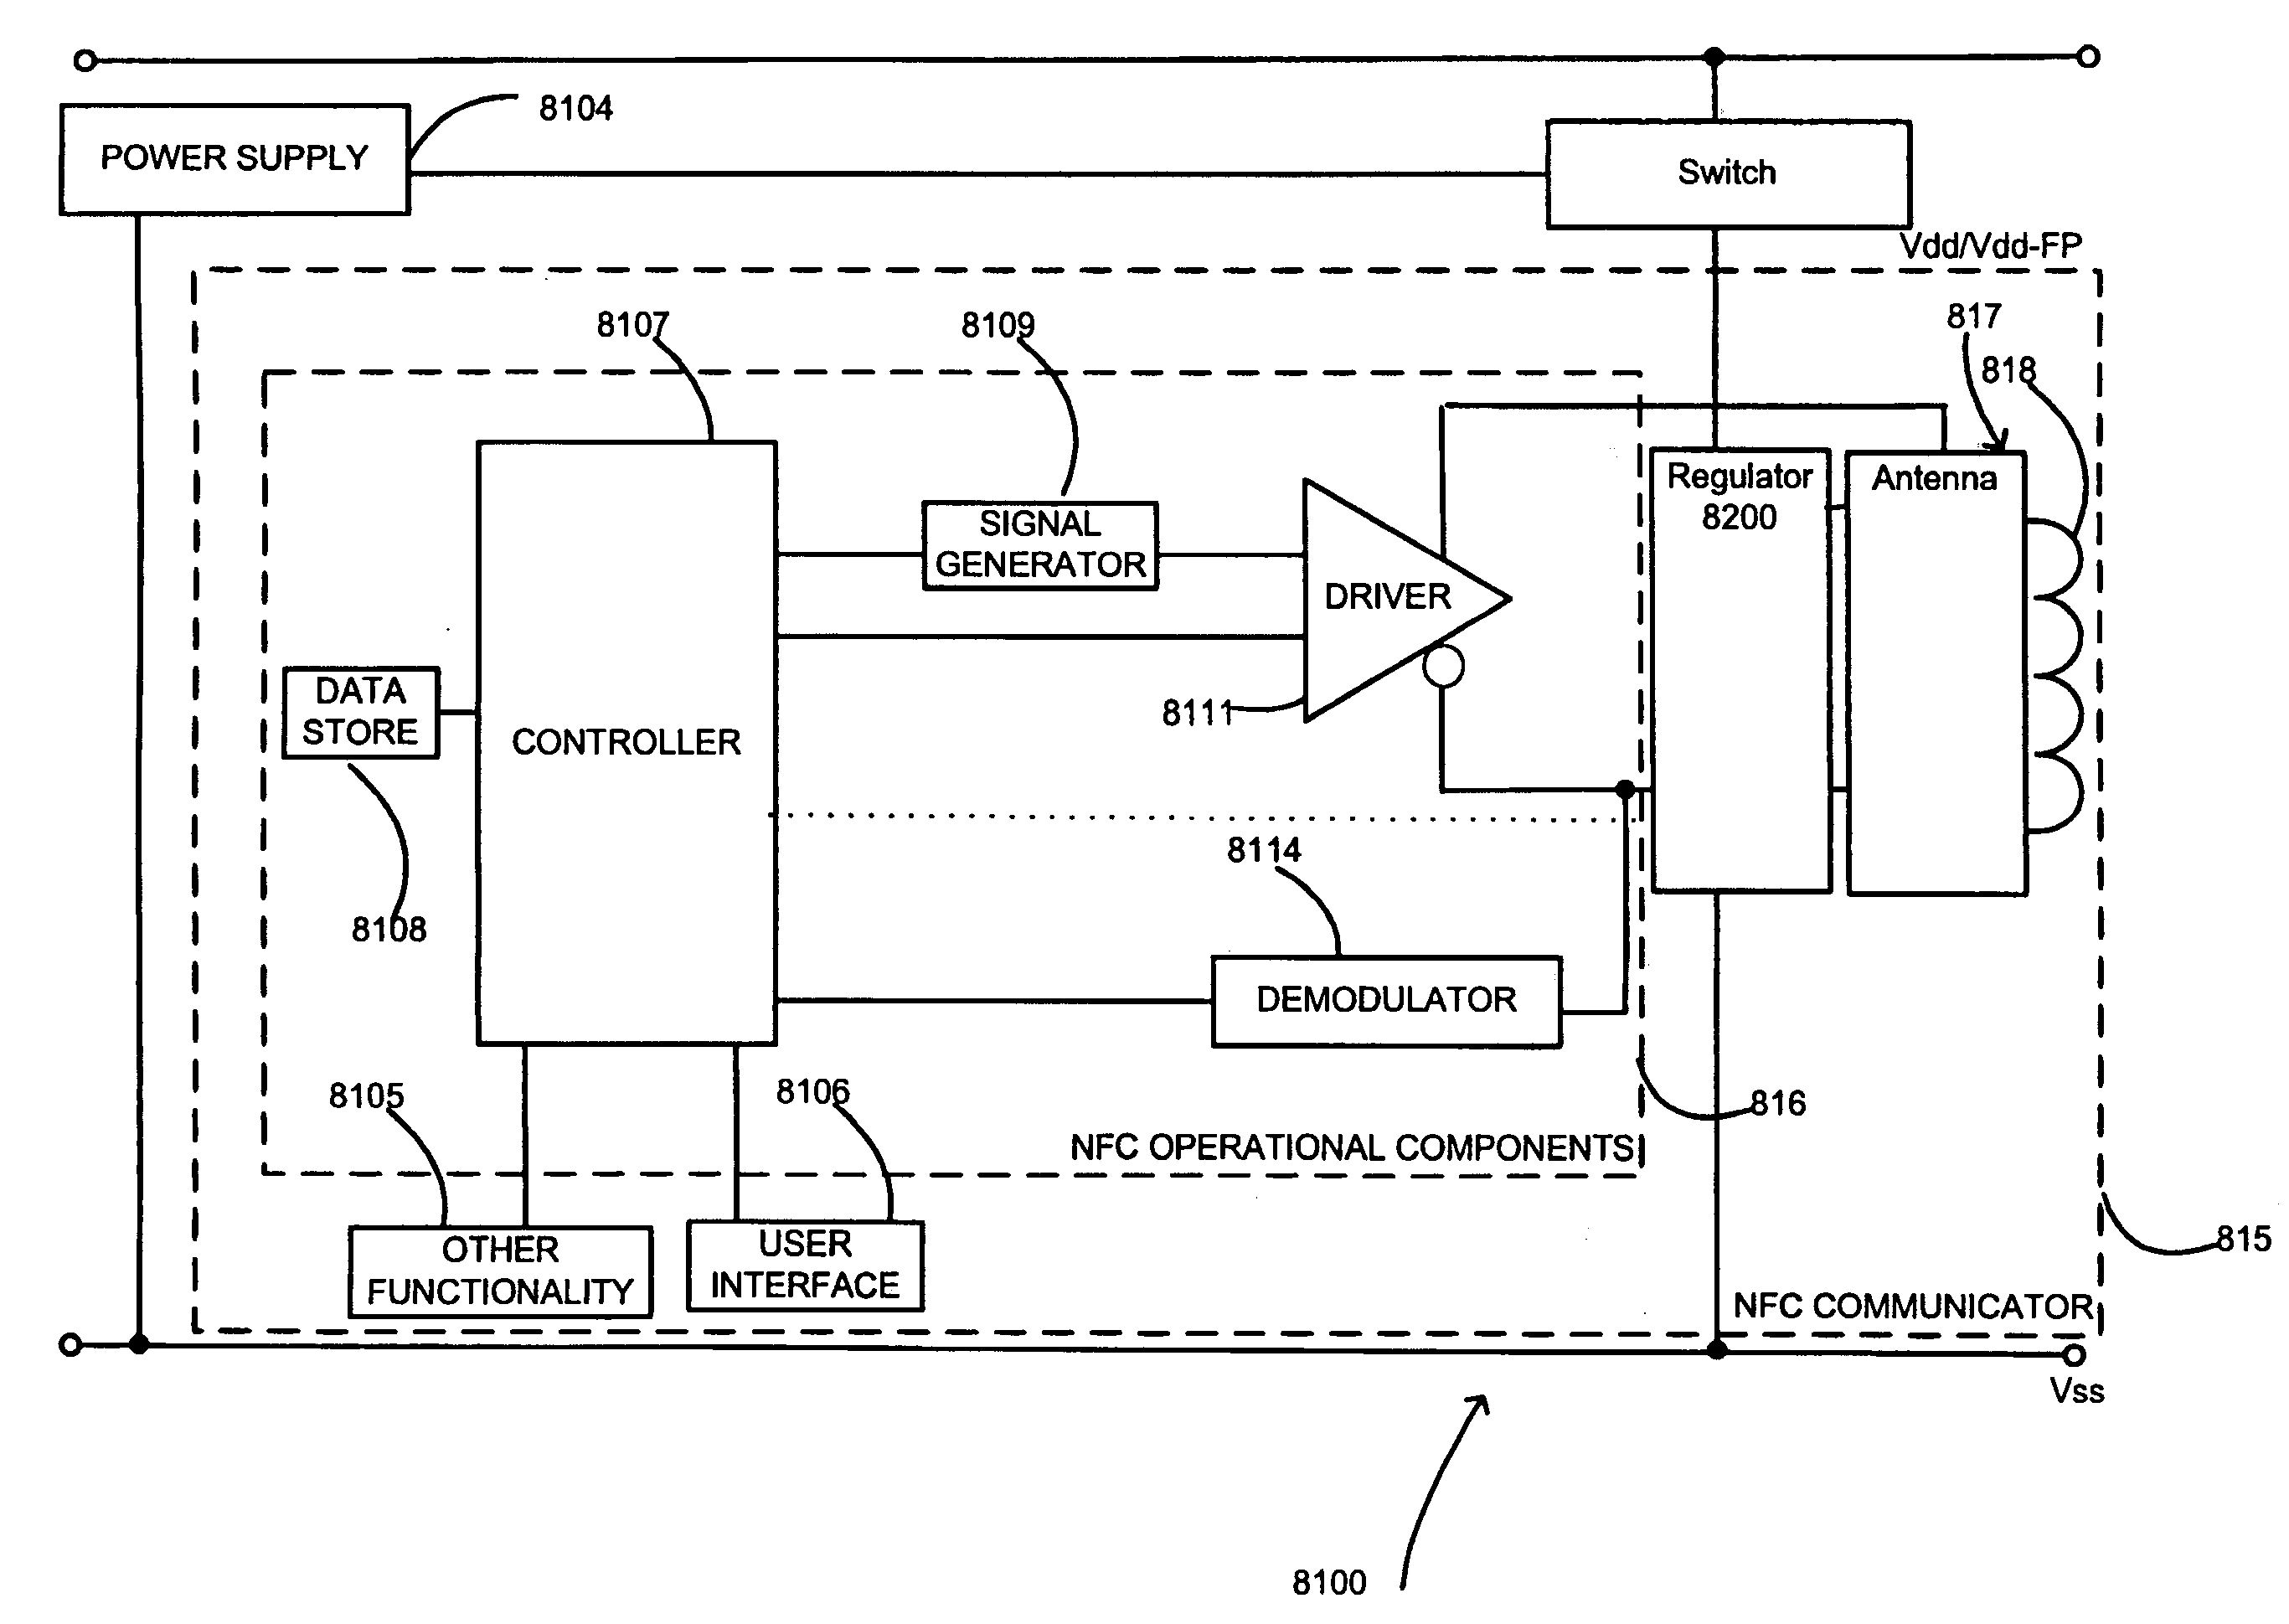 Near field RF communicators and near field communications-enabled devices